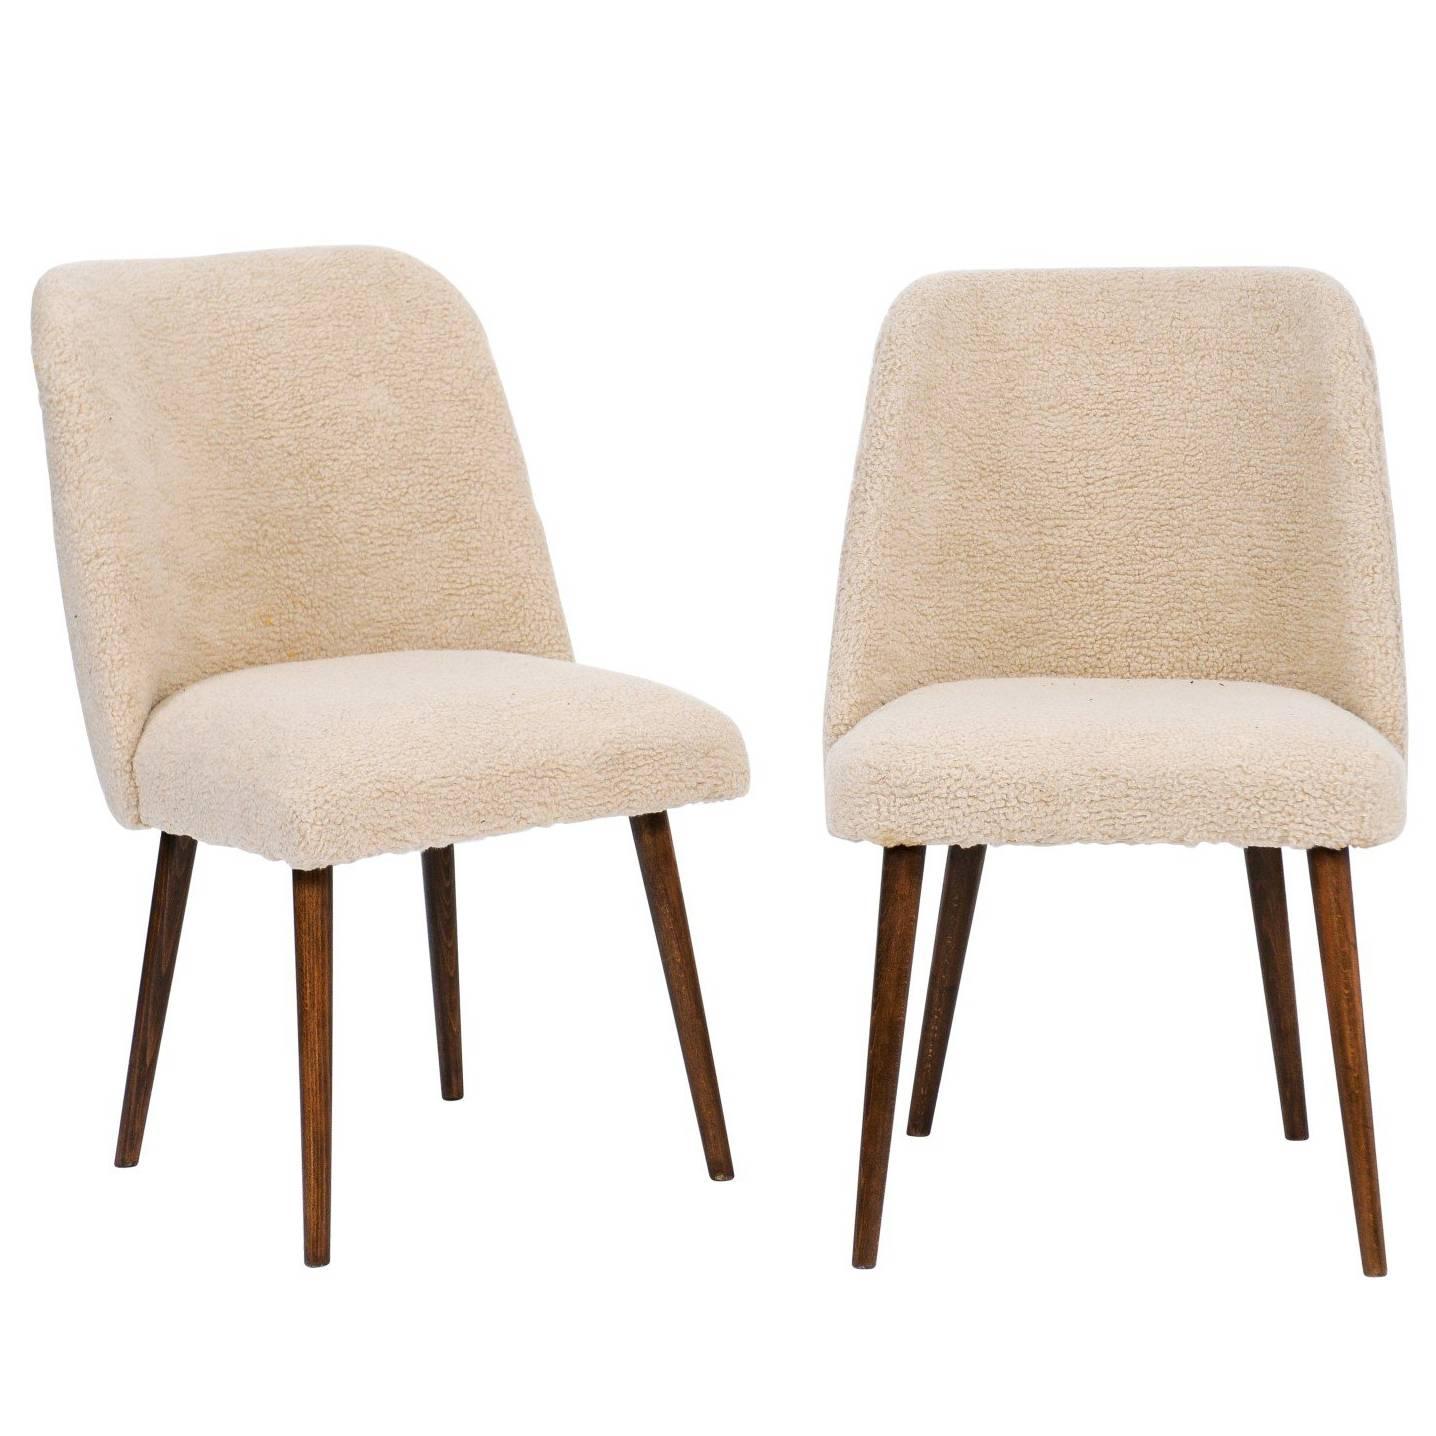 Pair of French Mouton Upholstered Side Chairs from the Mid-Century